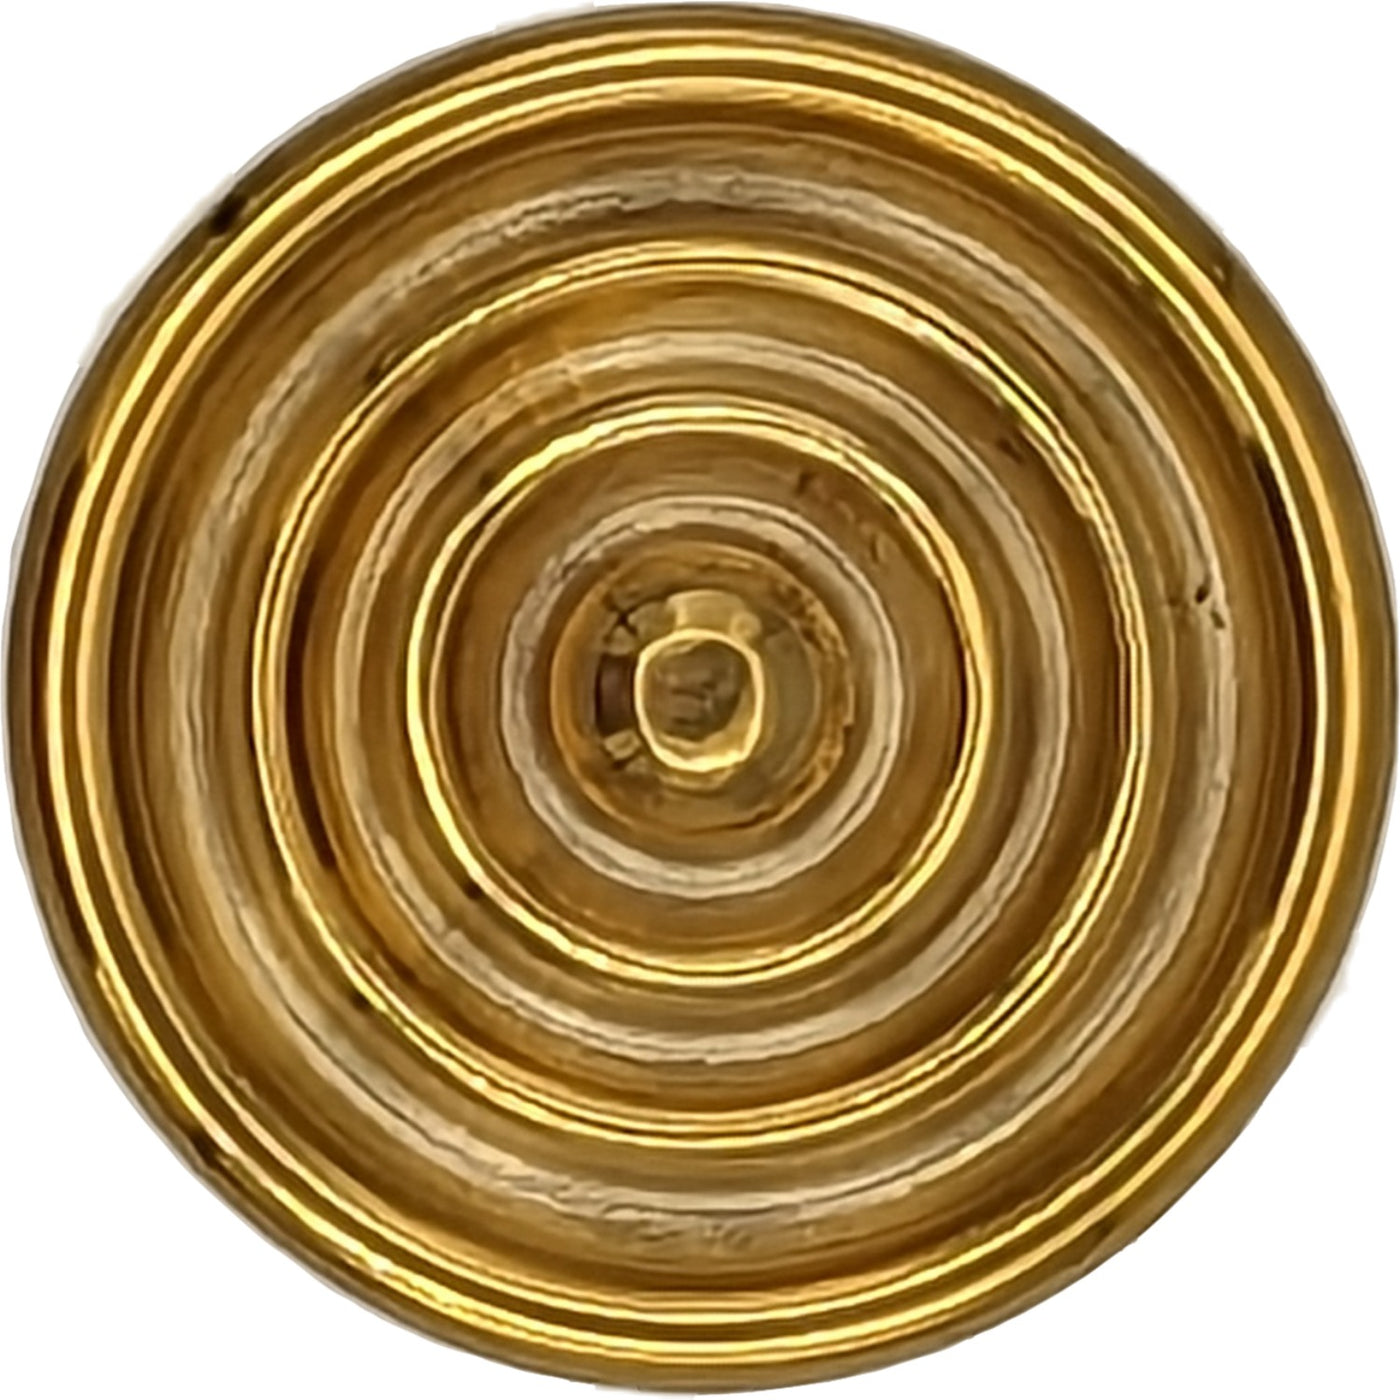 1 1/2 Inch Concentric Circle Cabinet Knob (Several Finishes Available)